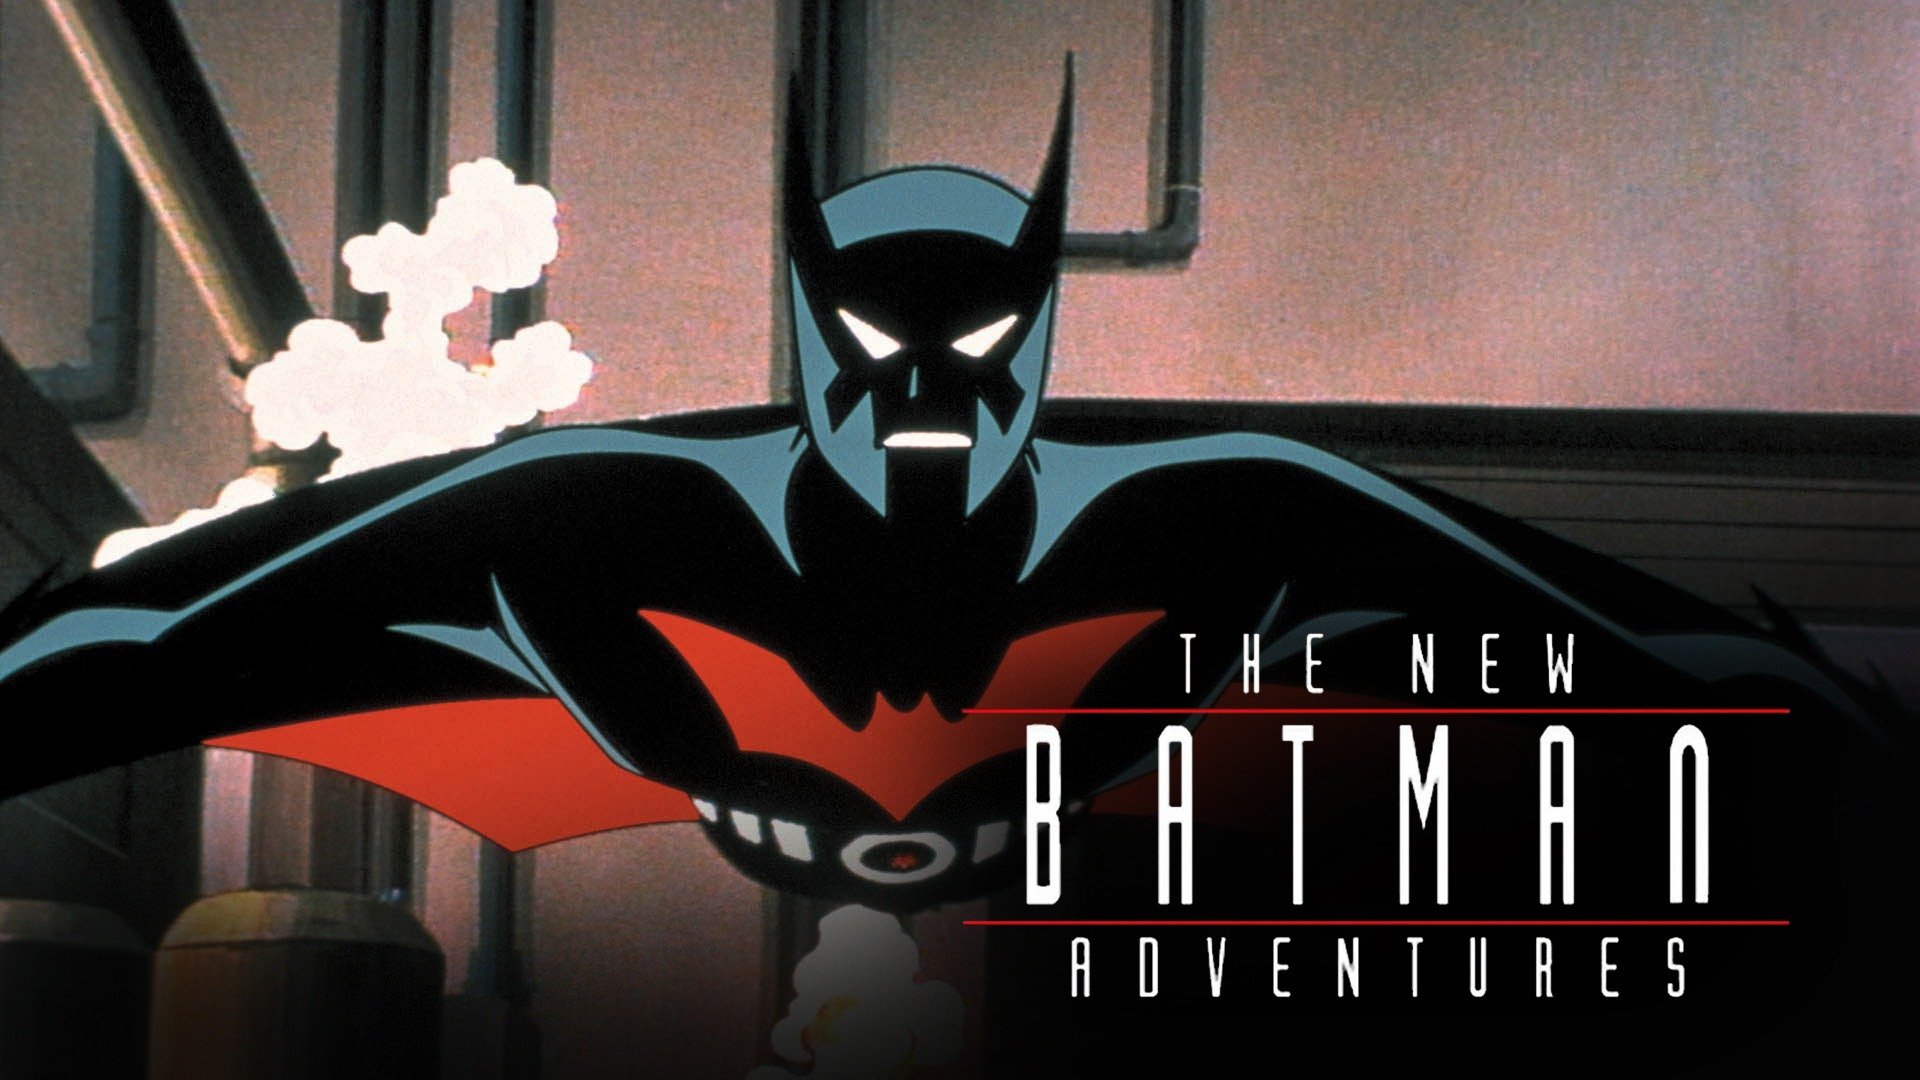 Batman: The Animated Series - Rotten Tomatoes